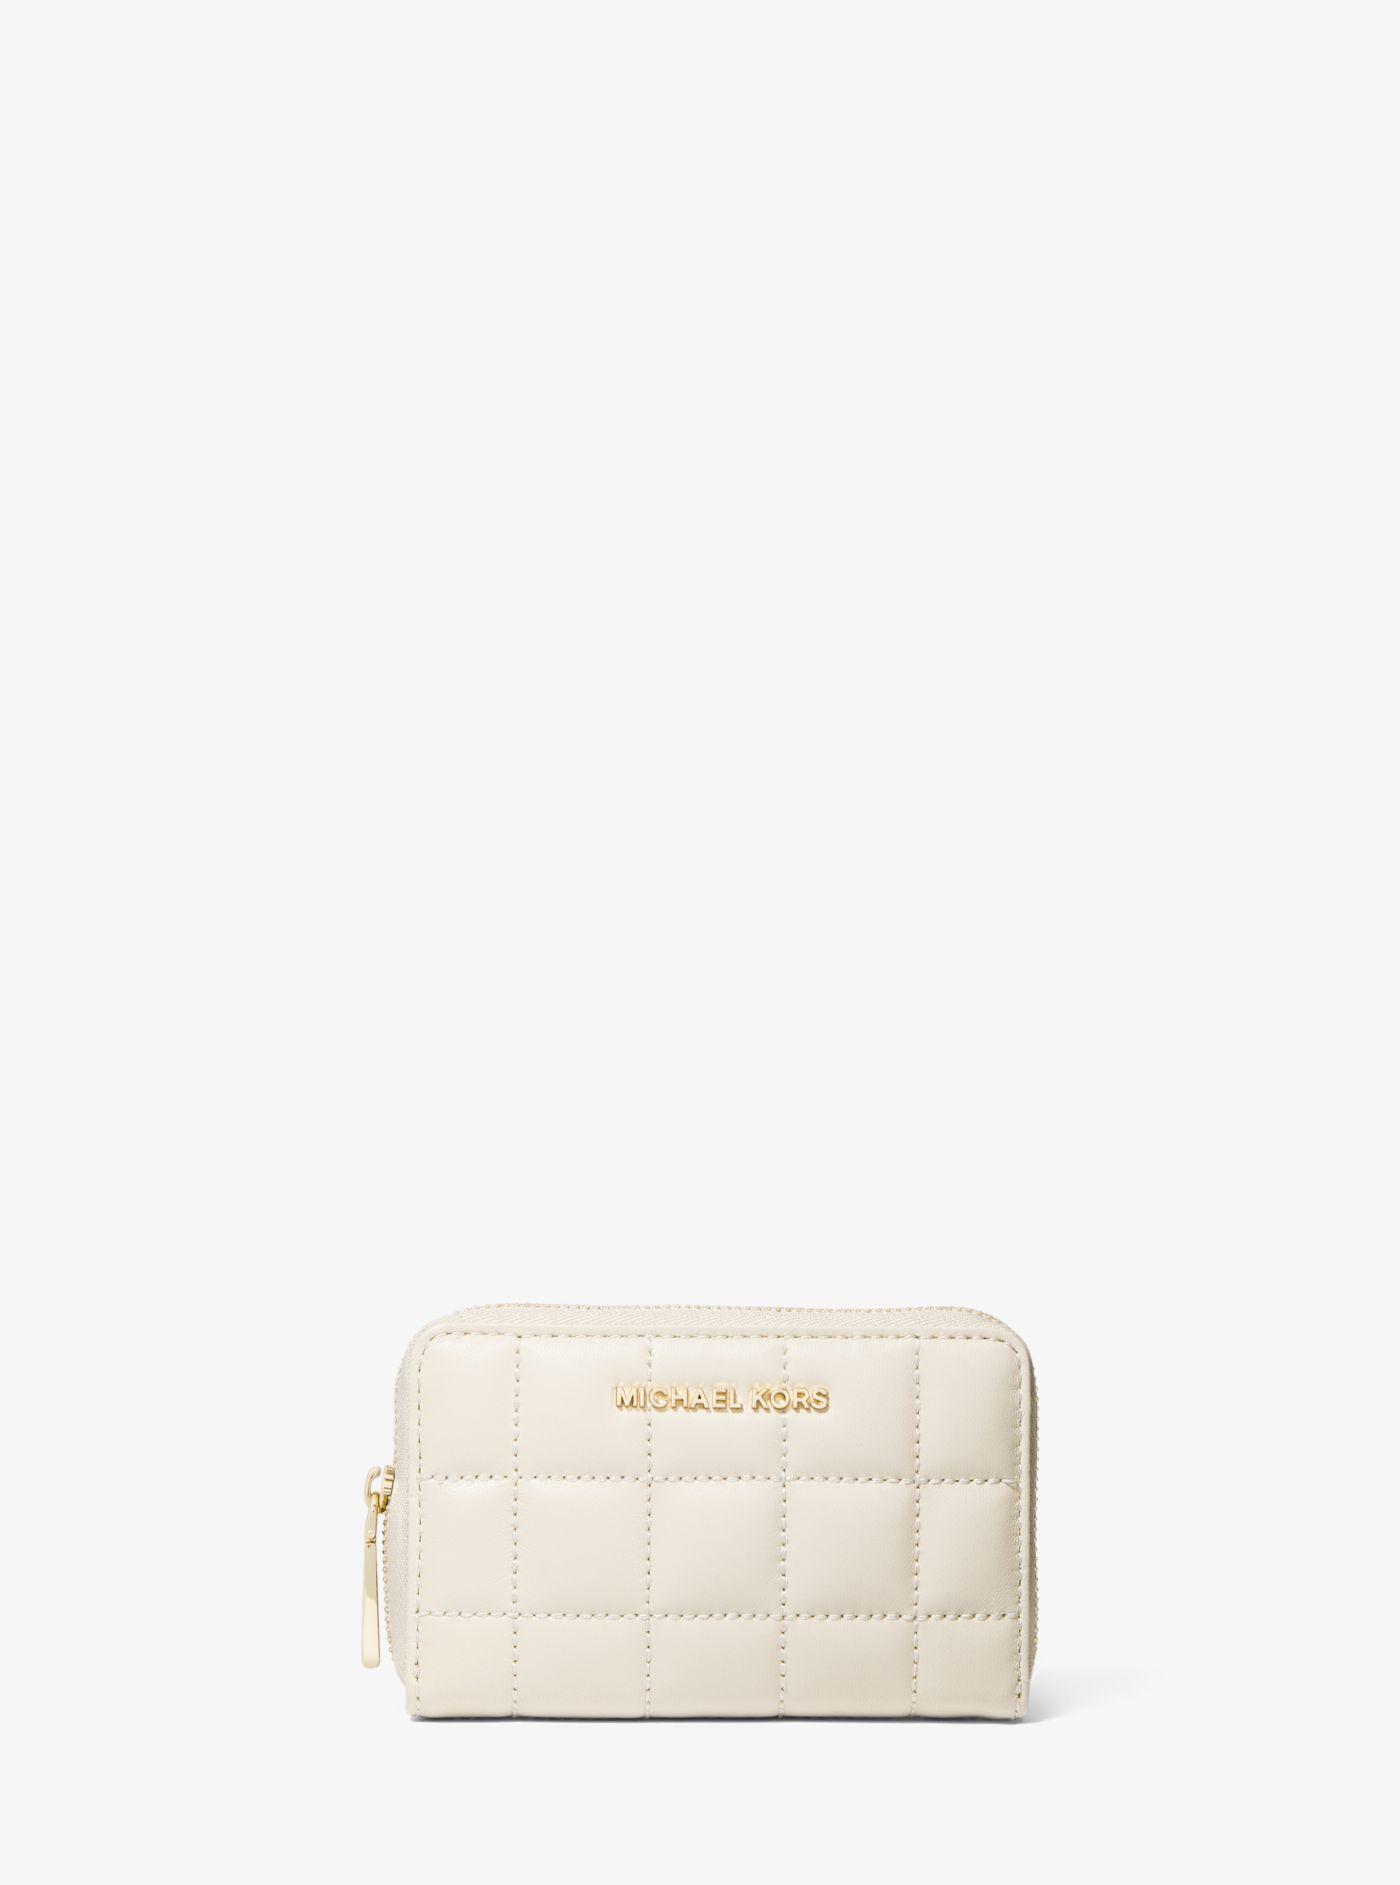 Michael Kors Small Quilted Leather Wallet in lt Cream (Natural) - Lyst